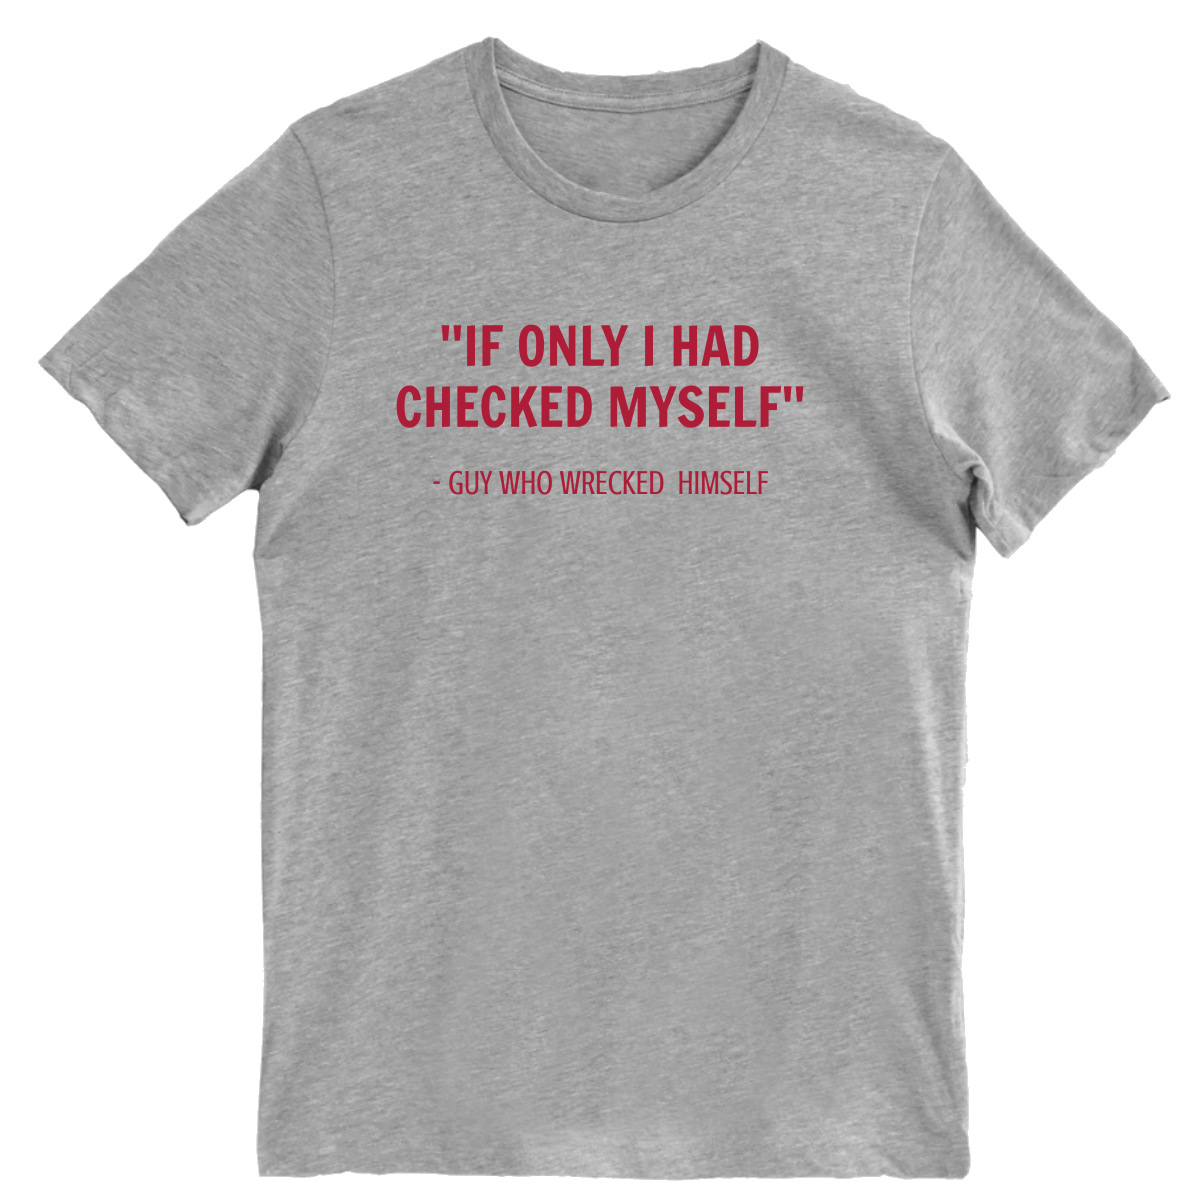 If I only had checked myself Men's T-shirt | Gray